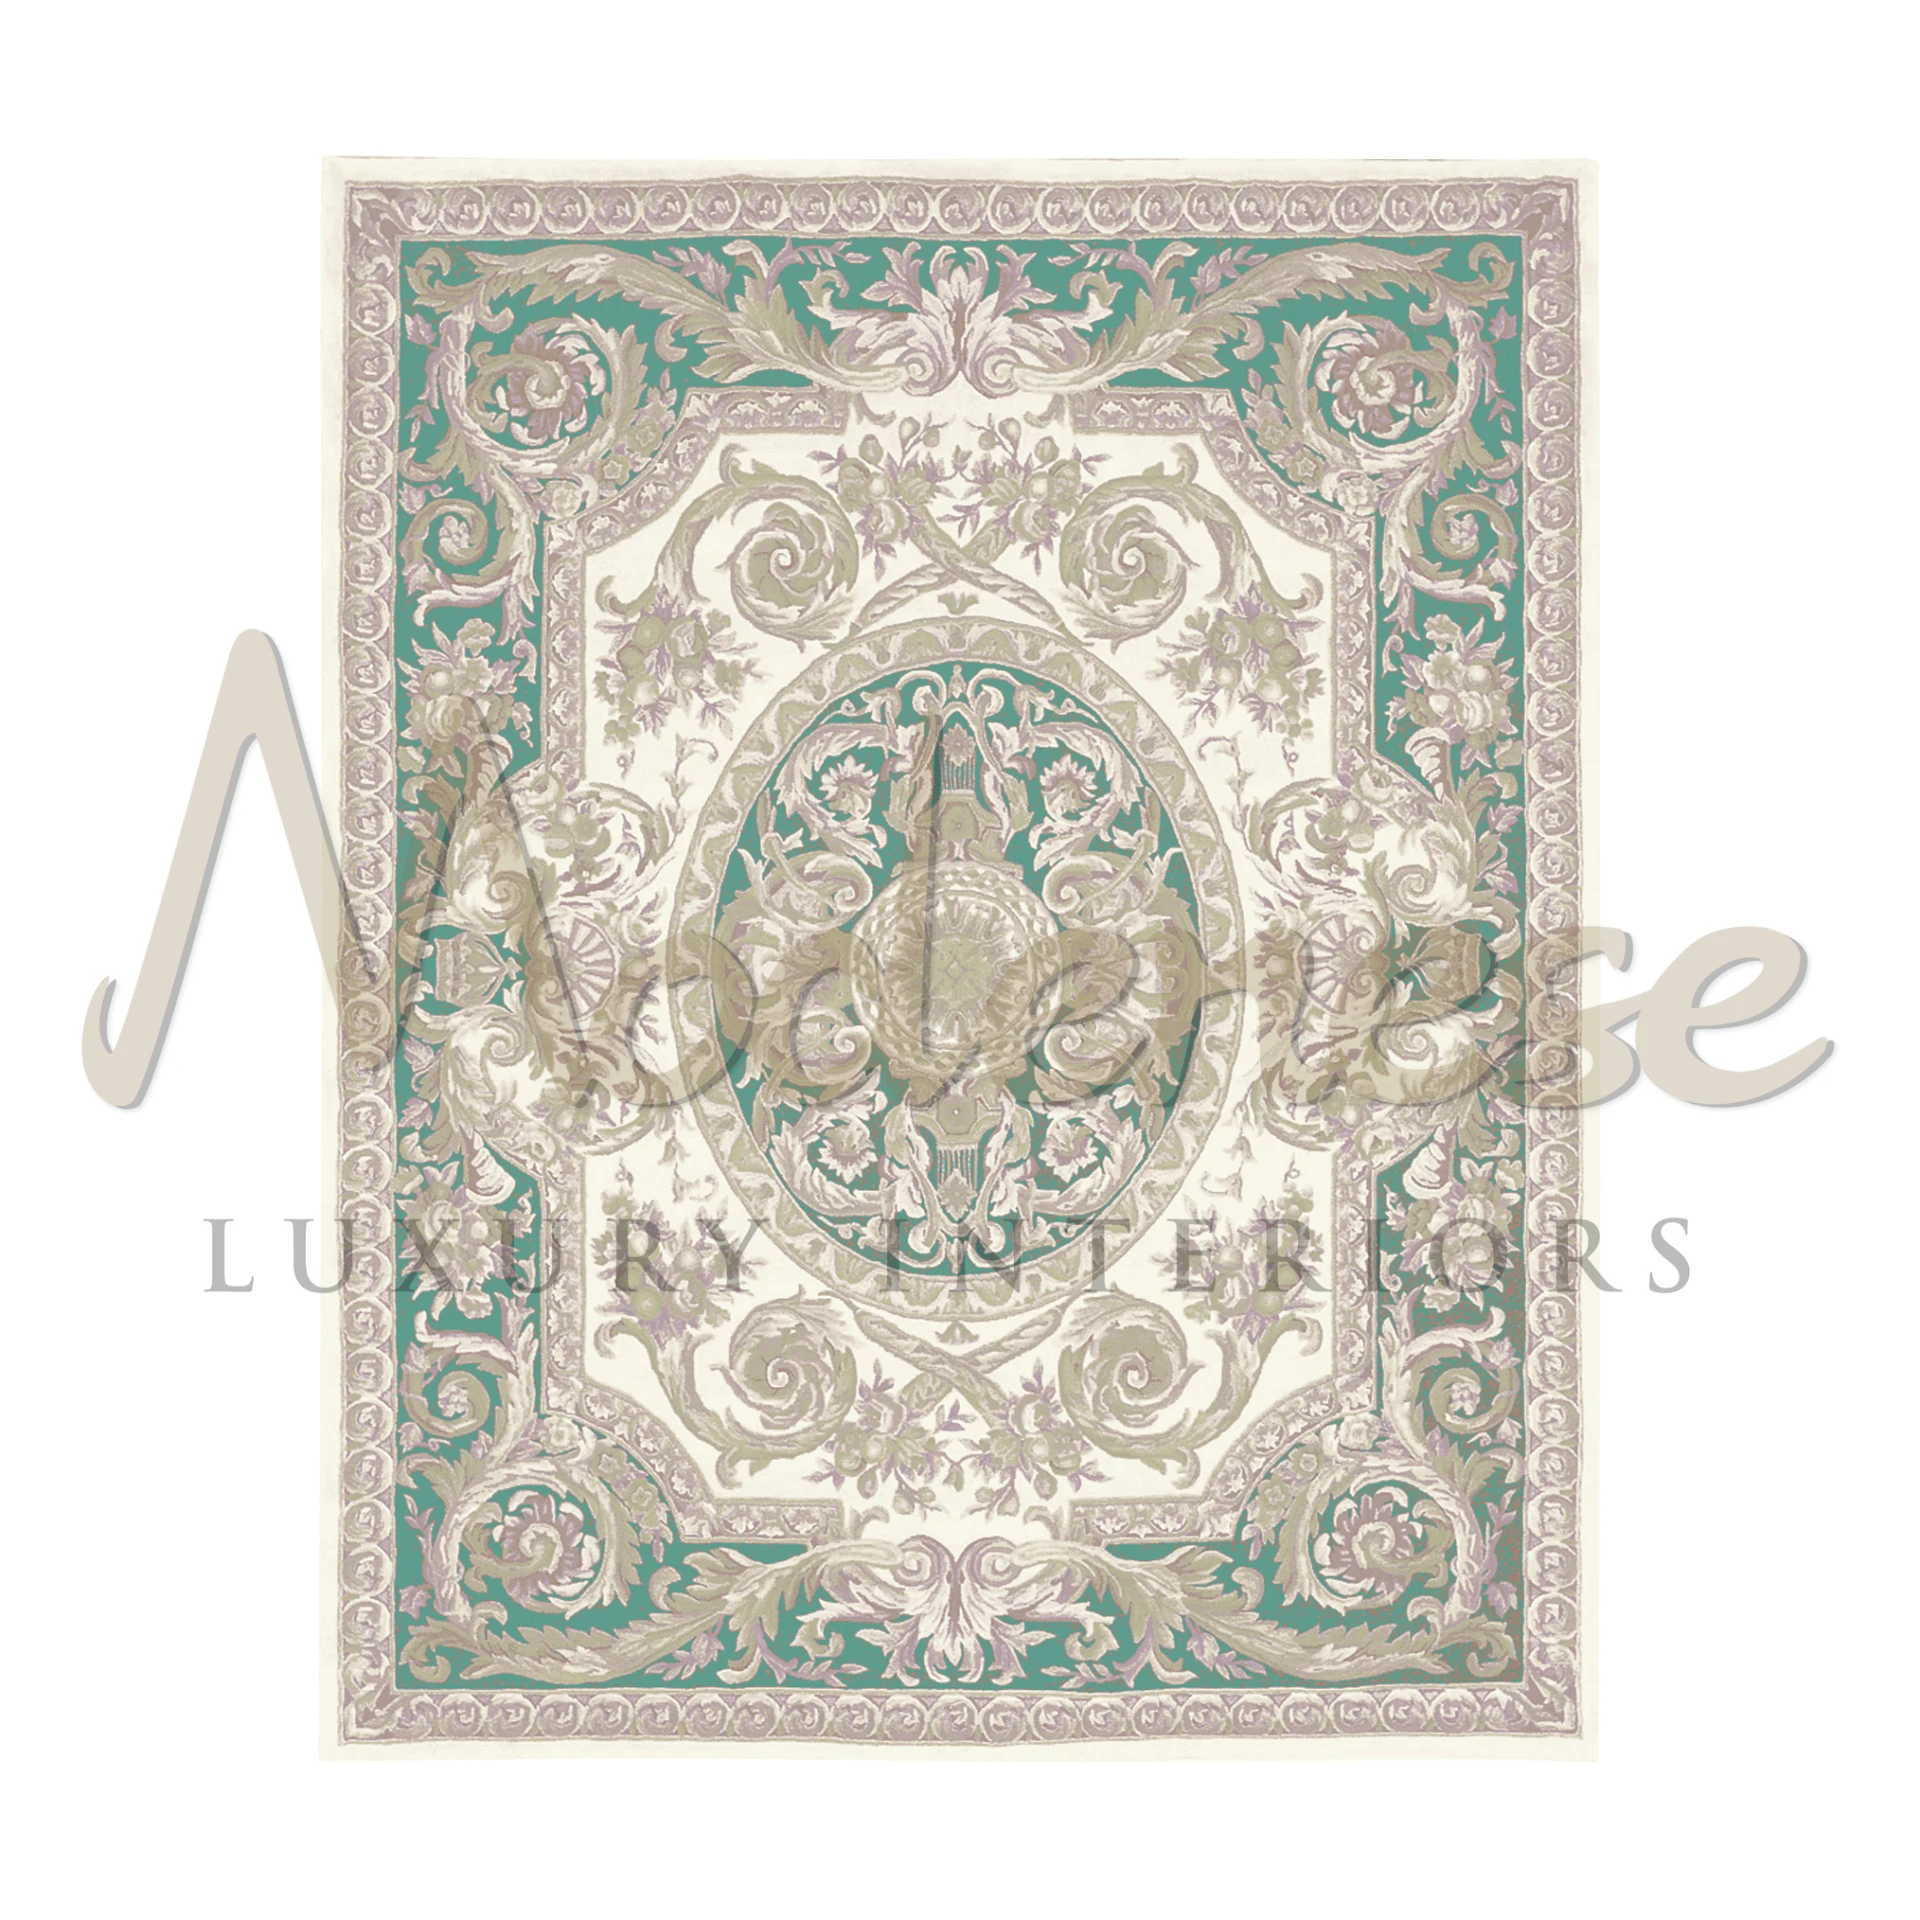 Shiny Pure Handcreated Light Blue Rug for elegant palaces projects